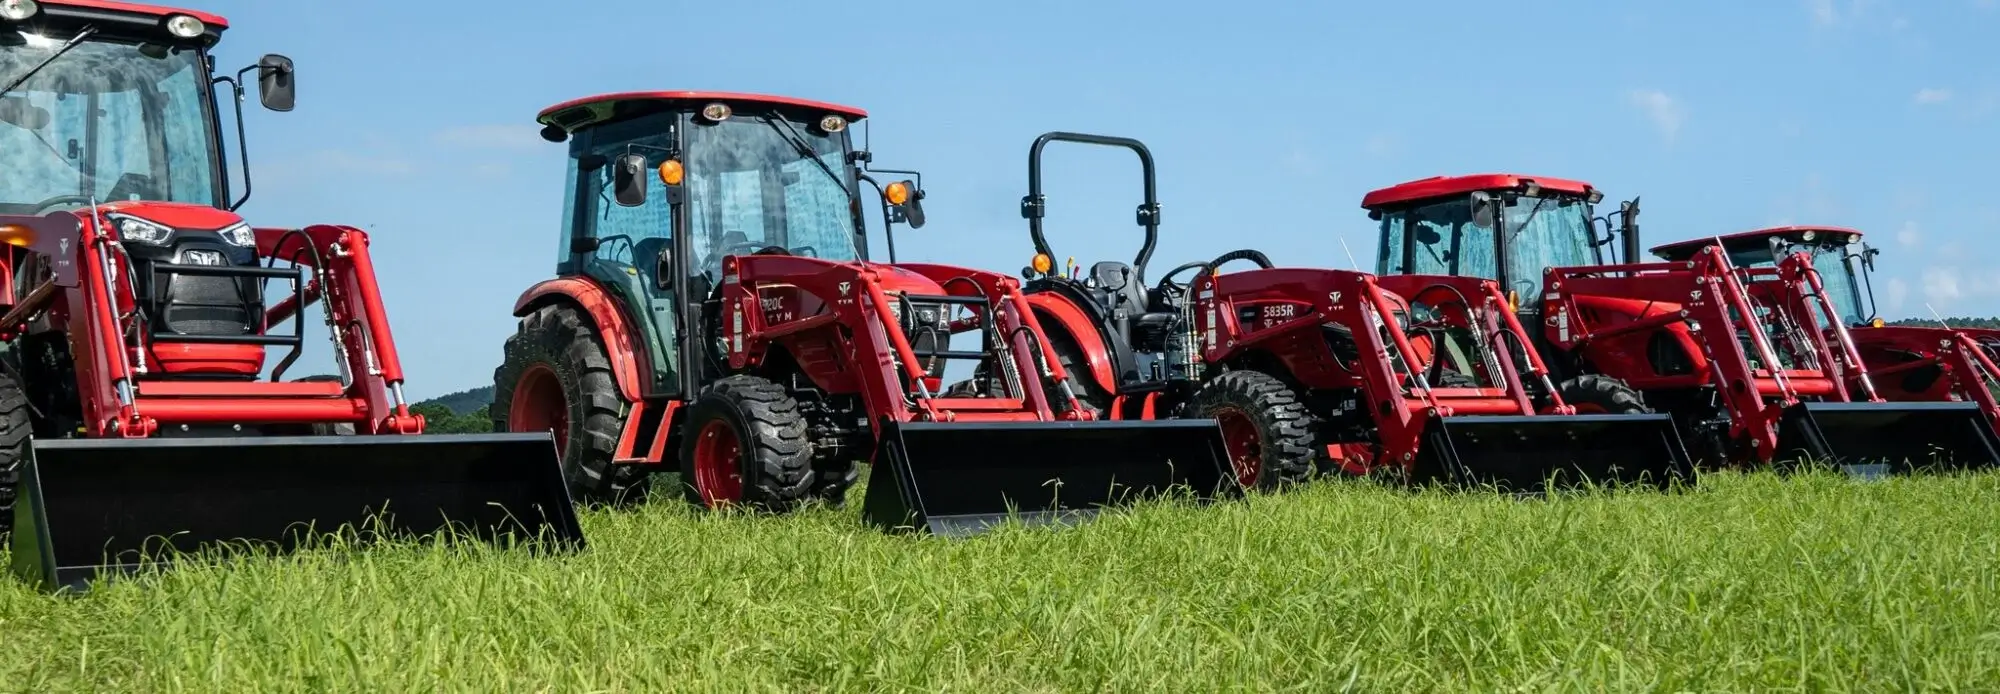 Red tractors in a field